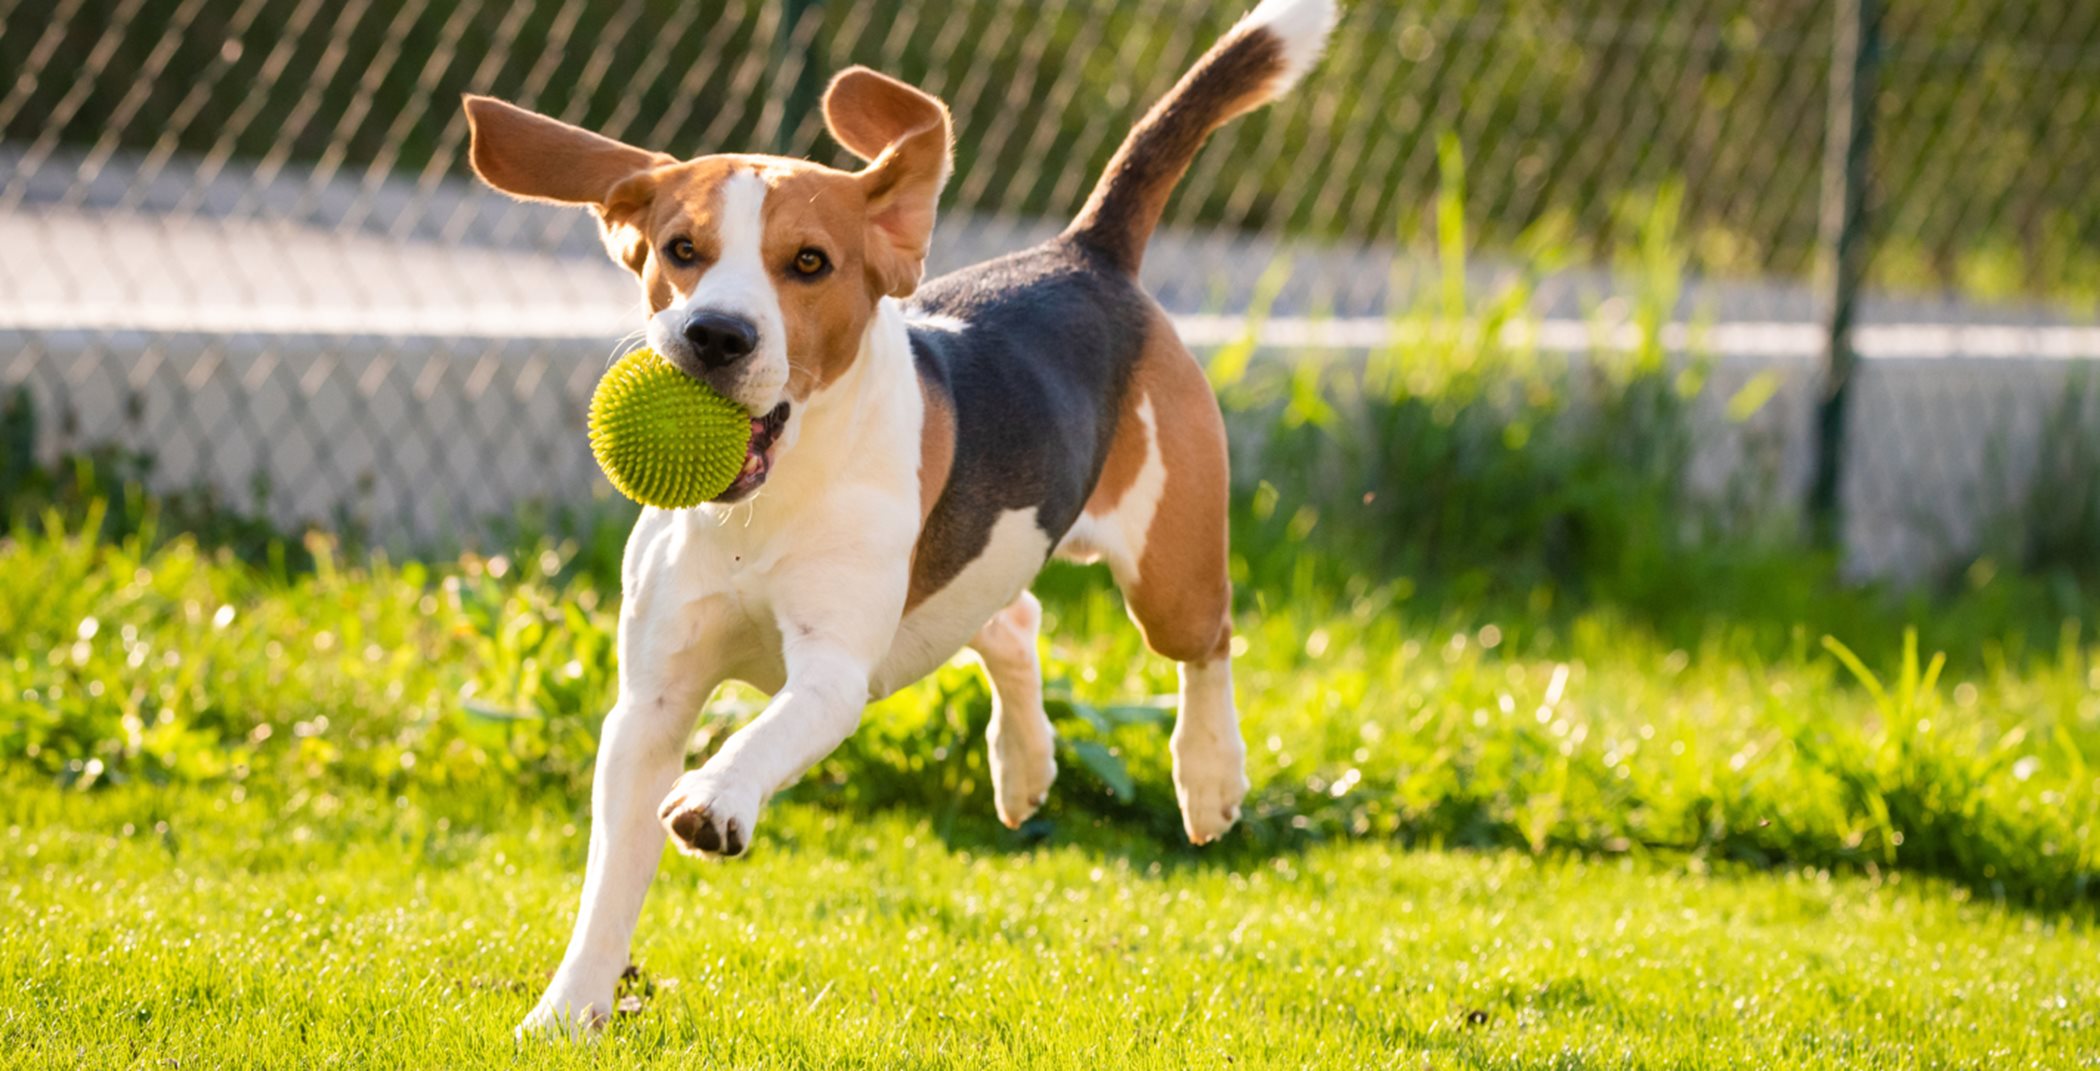 Beagle dog with a green tennis ball in its mouth running toward the camera on a grass field